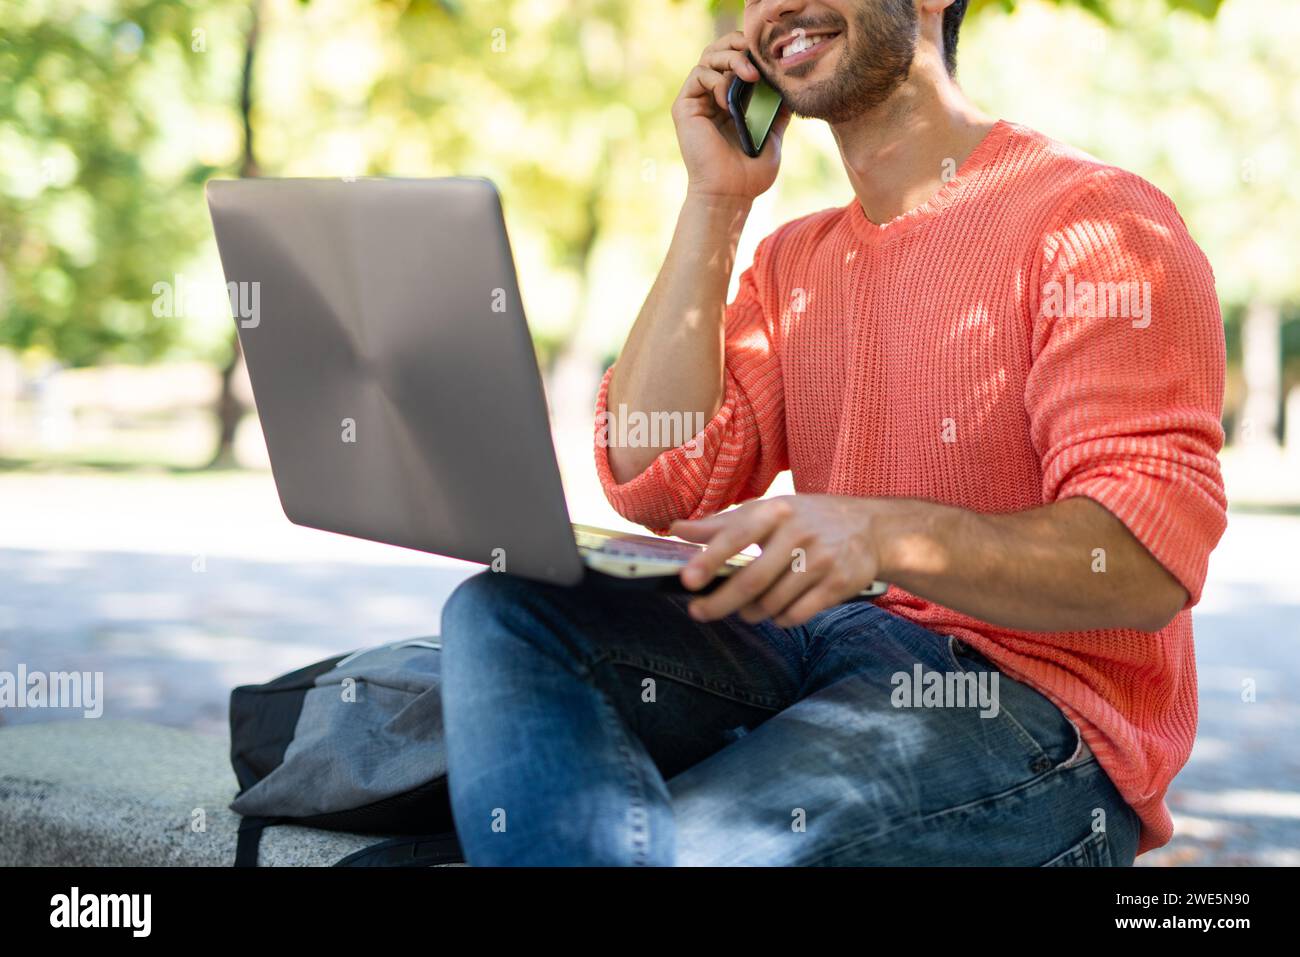 Young man using a laptop computer in a park while talking on his cellphone, young people and technology concept Stock Photo